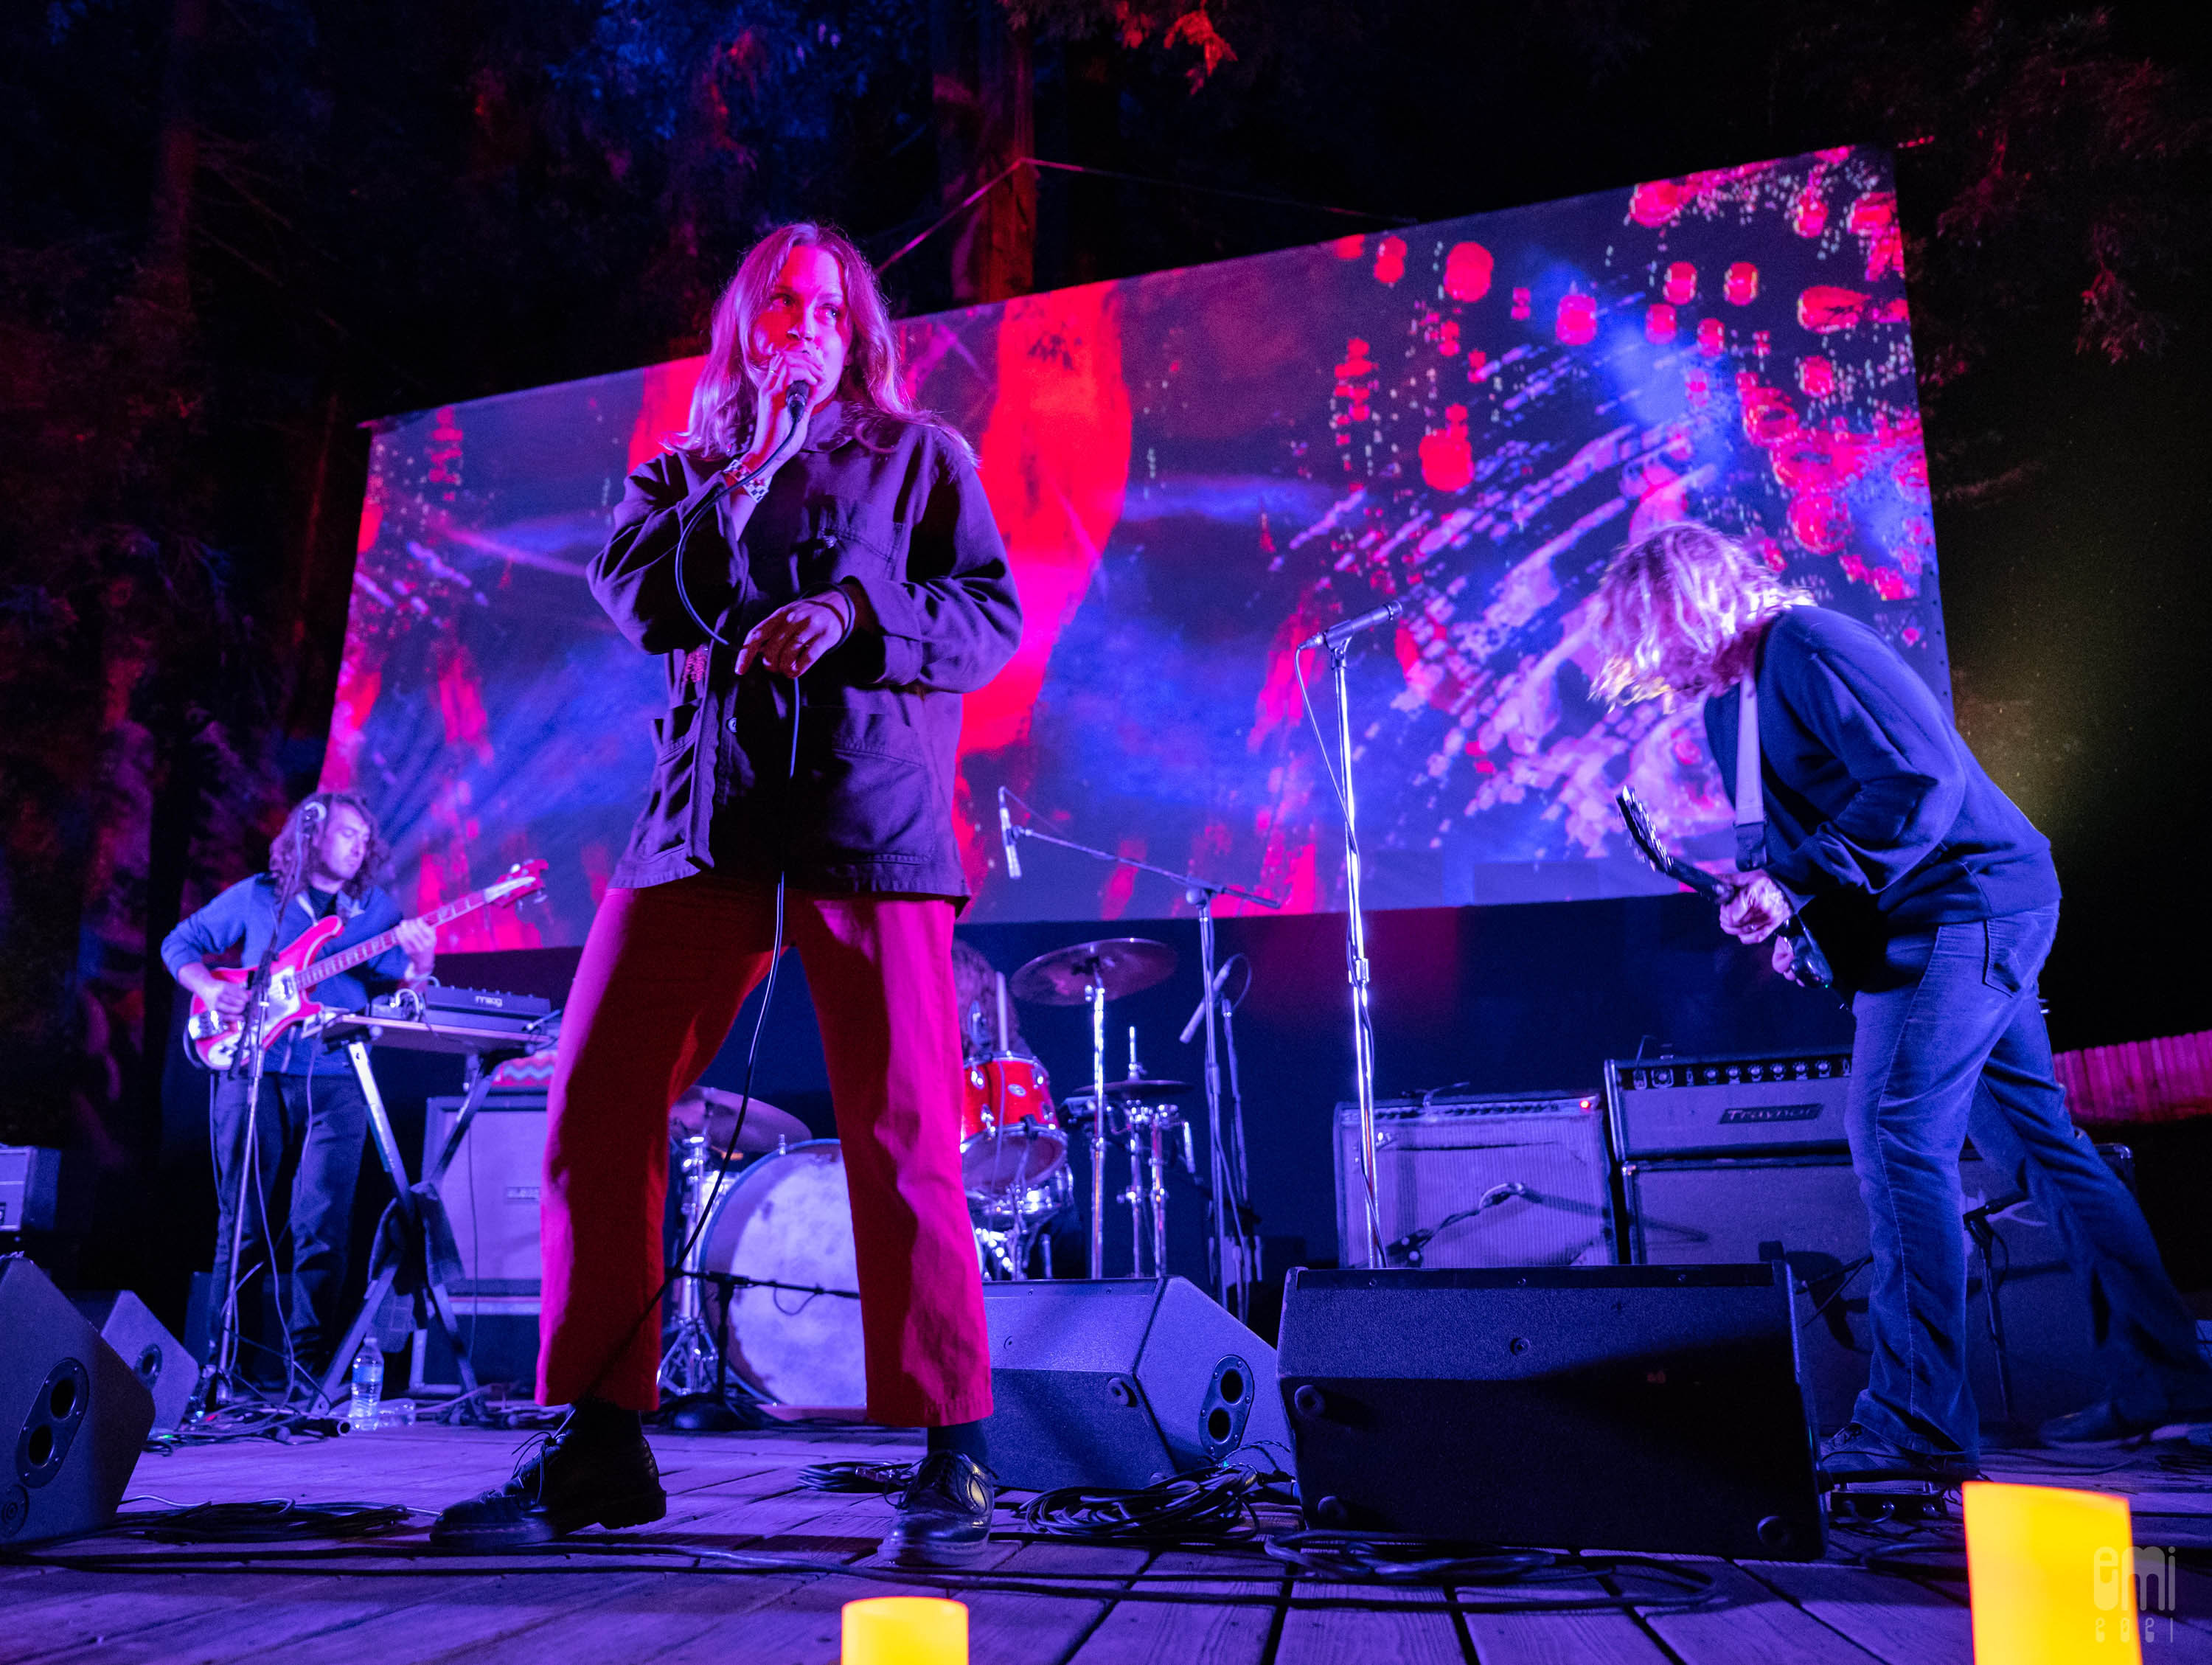 Photography – 2021.9.15 (((folkYEAH!))) Presents Ty Segall and the Freedom Band and Jess Cornelius with Mad Alchemy Liquid Light Show at Henry Miller Memorial Library, Big Sur, CA